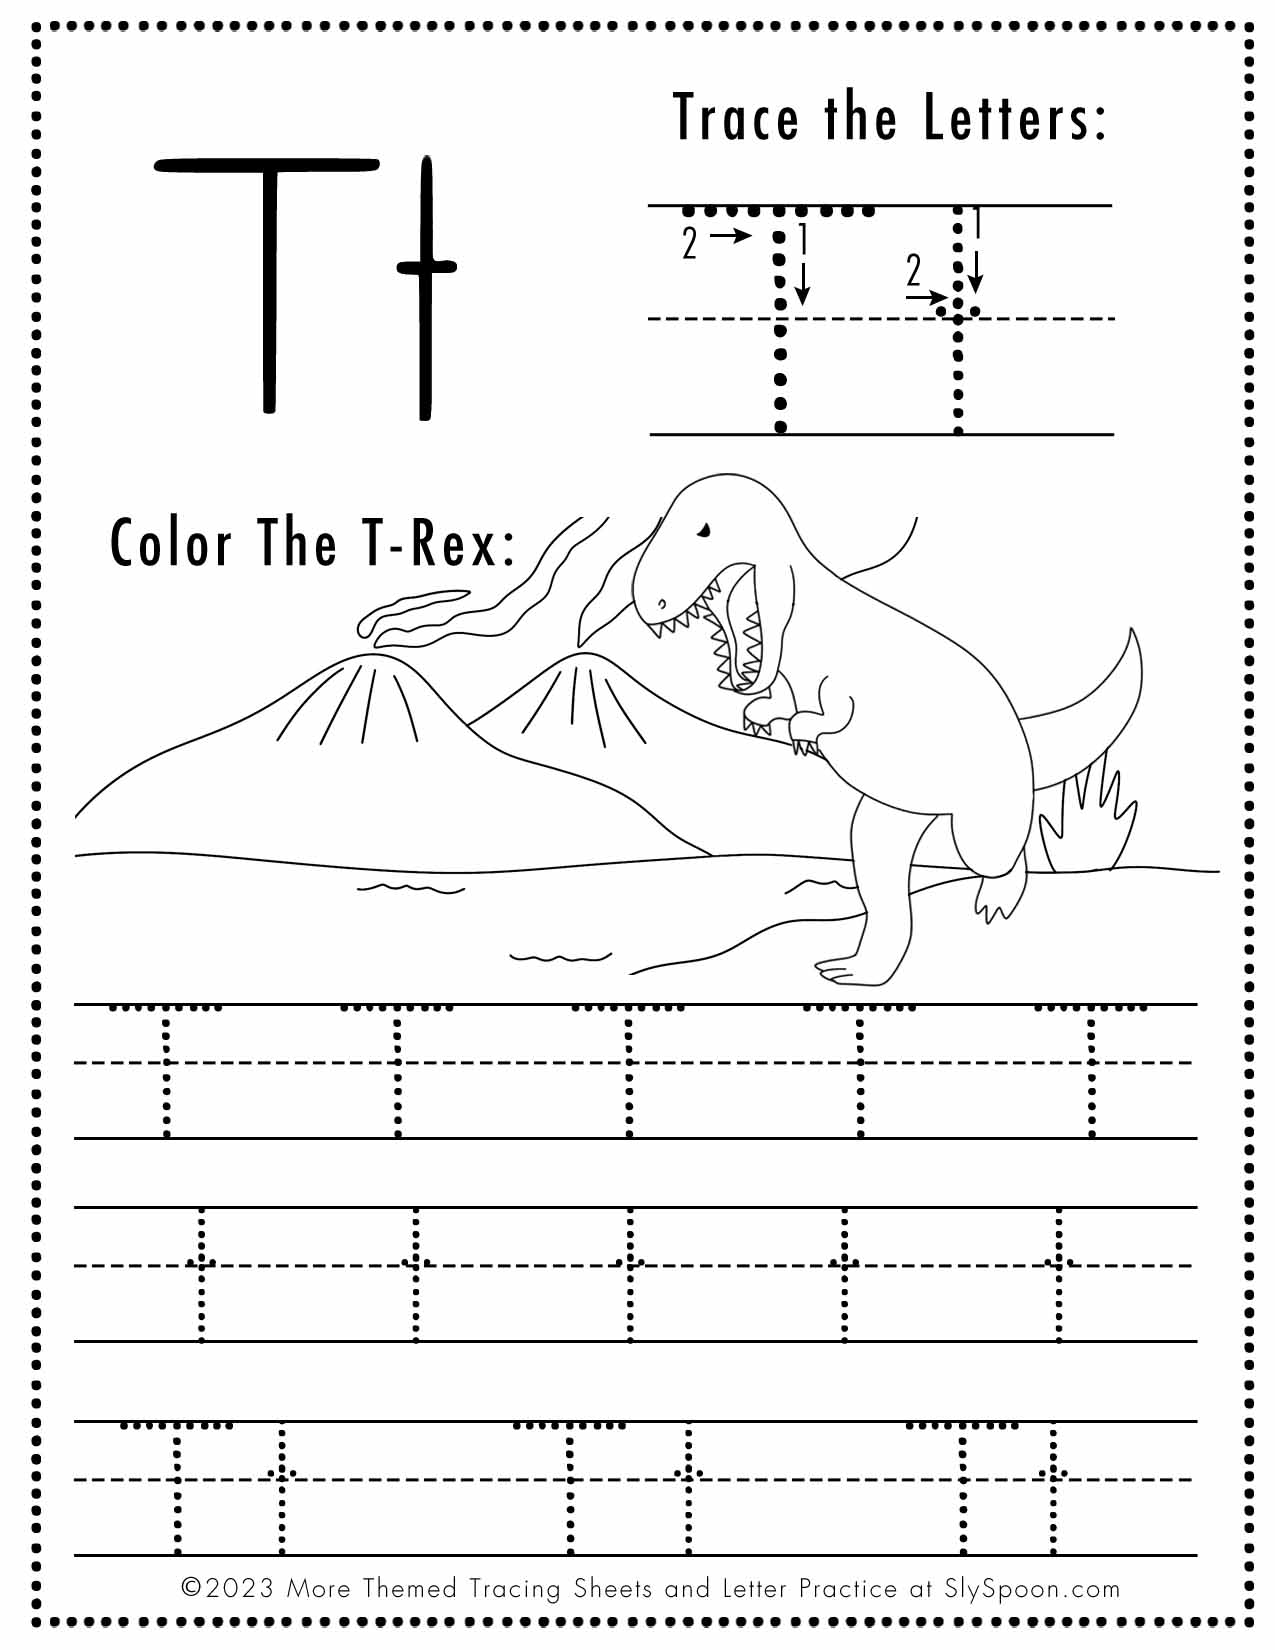 free-letter-t-tracing-worksheet-printable-dinosaur-themed-sly-spoon